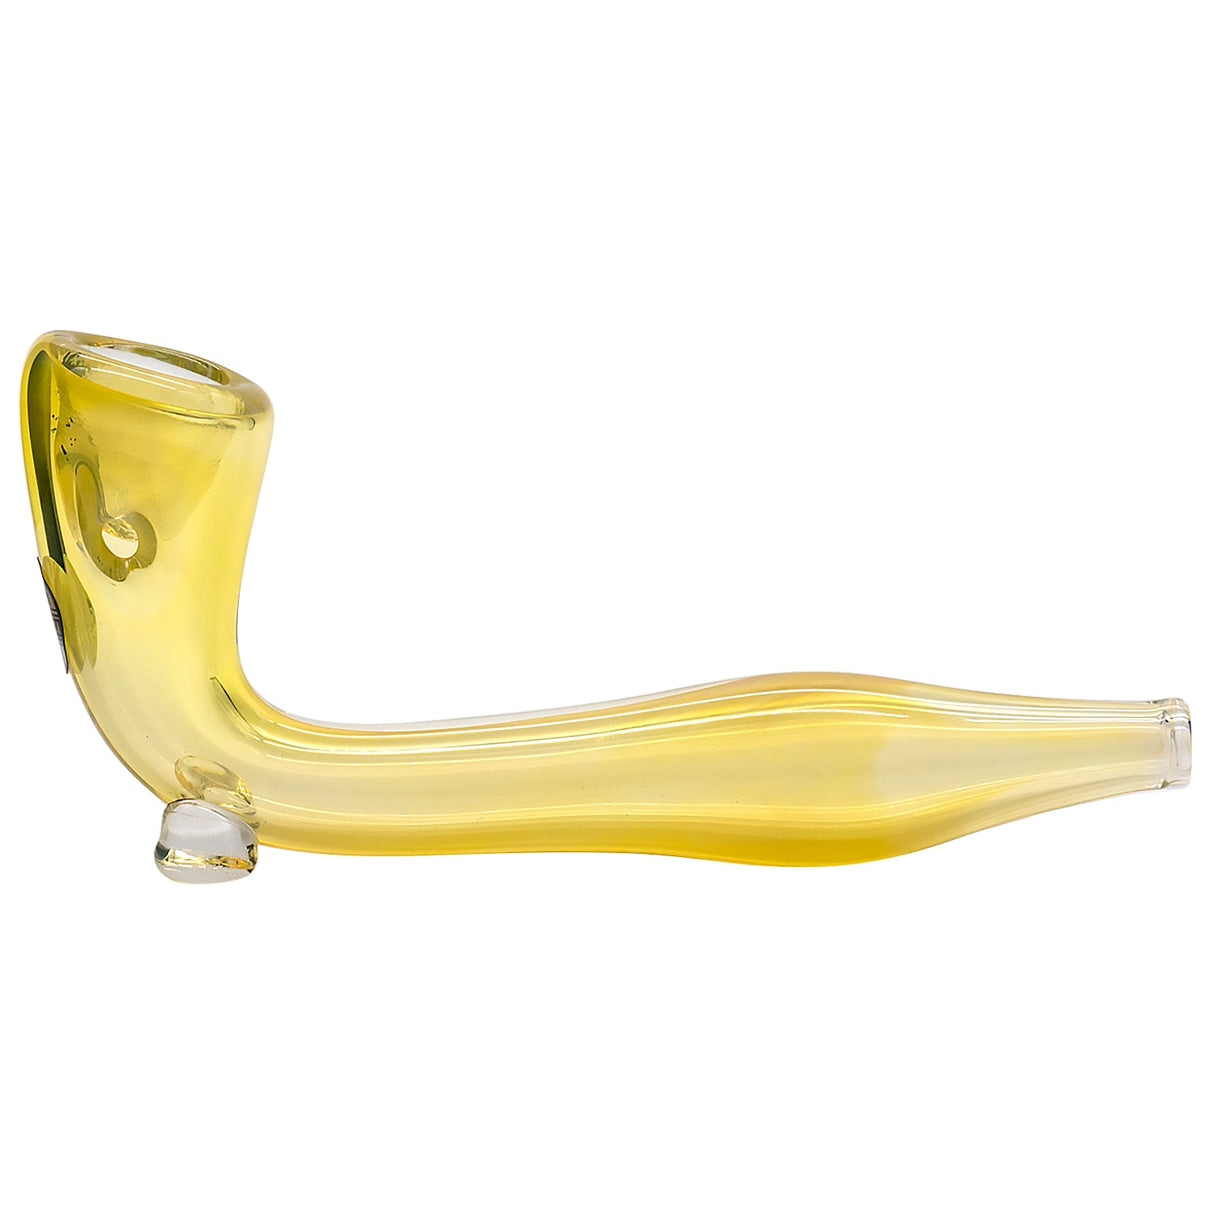 LA Pipes "Dublin" Fumed Sherlock Hand Pipe for Dry Herbs, 4.25" Length, Side View